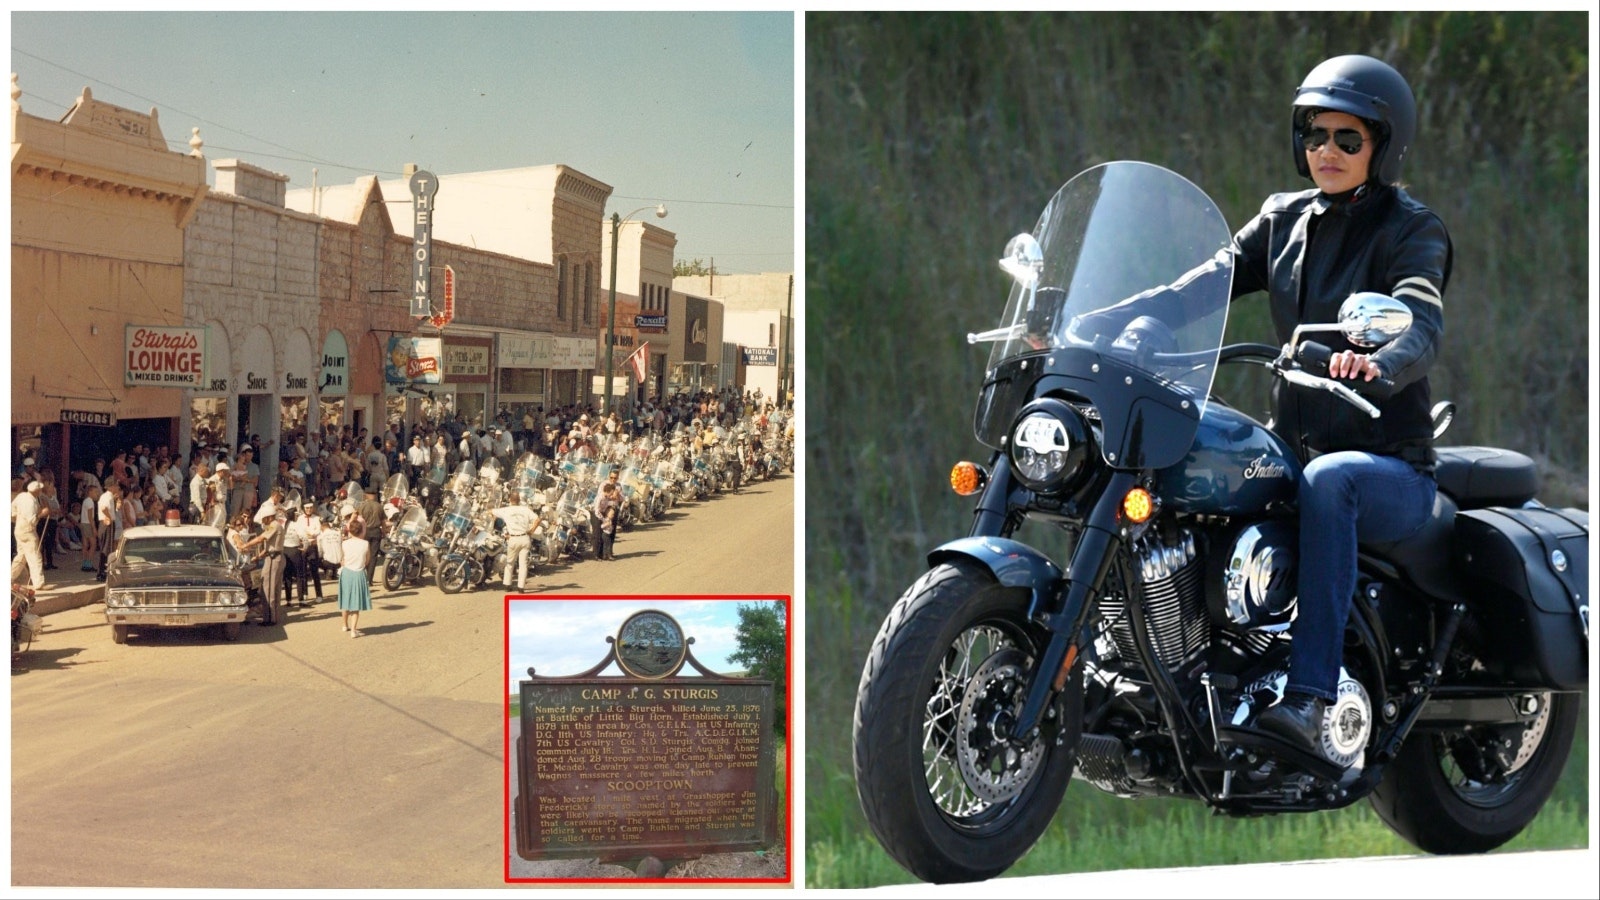 The Sturgis rally has grown over more than 80 decades. It's a favorite event for South Dakota Gov. Kristi Noem.